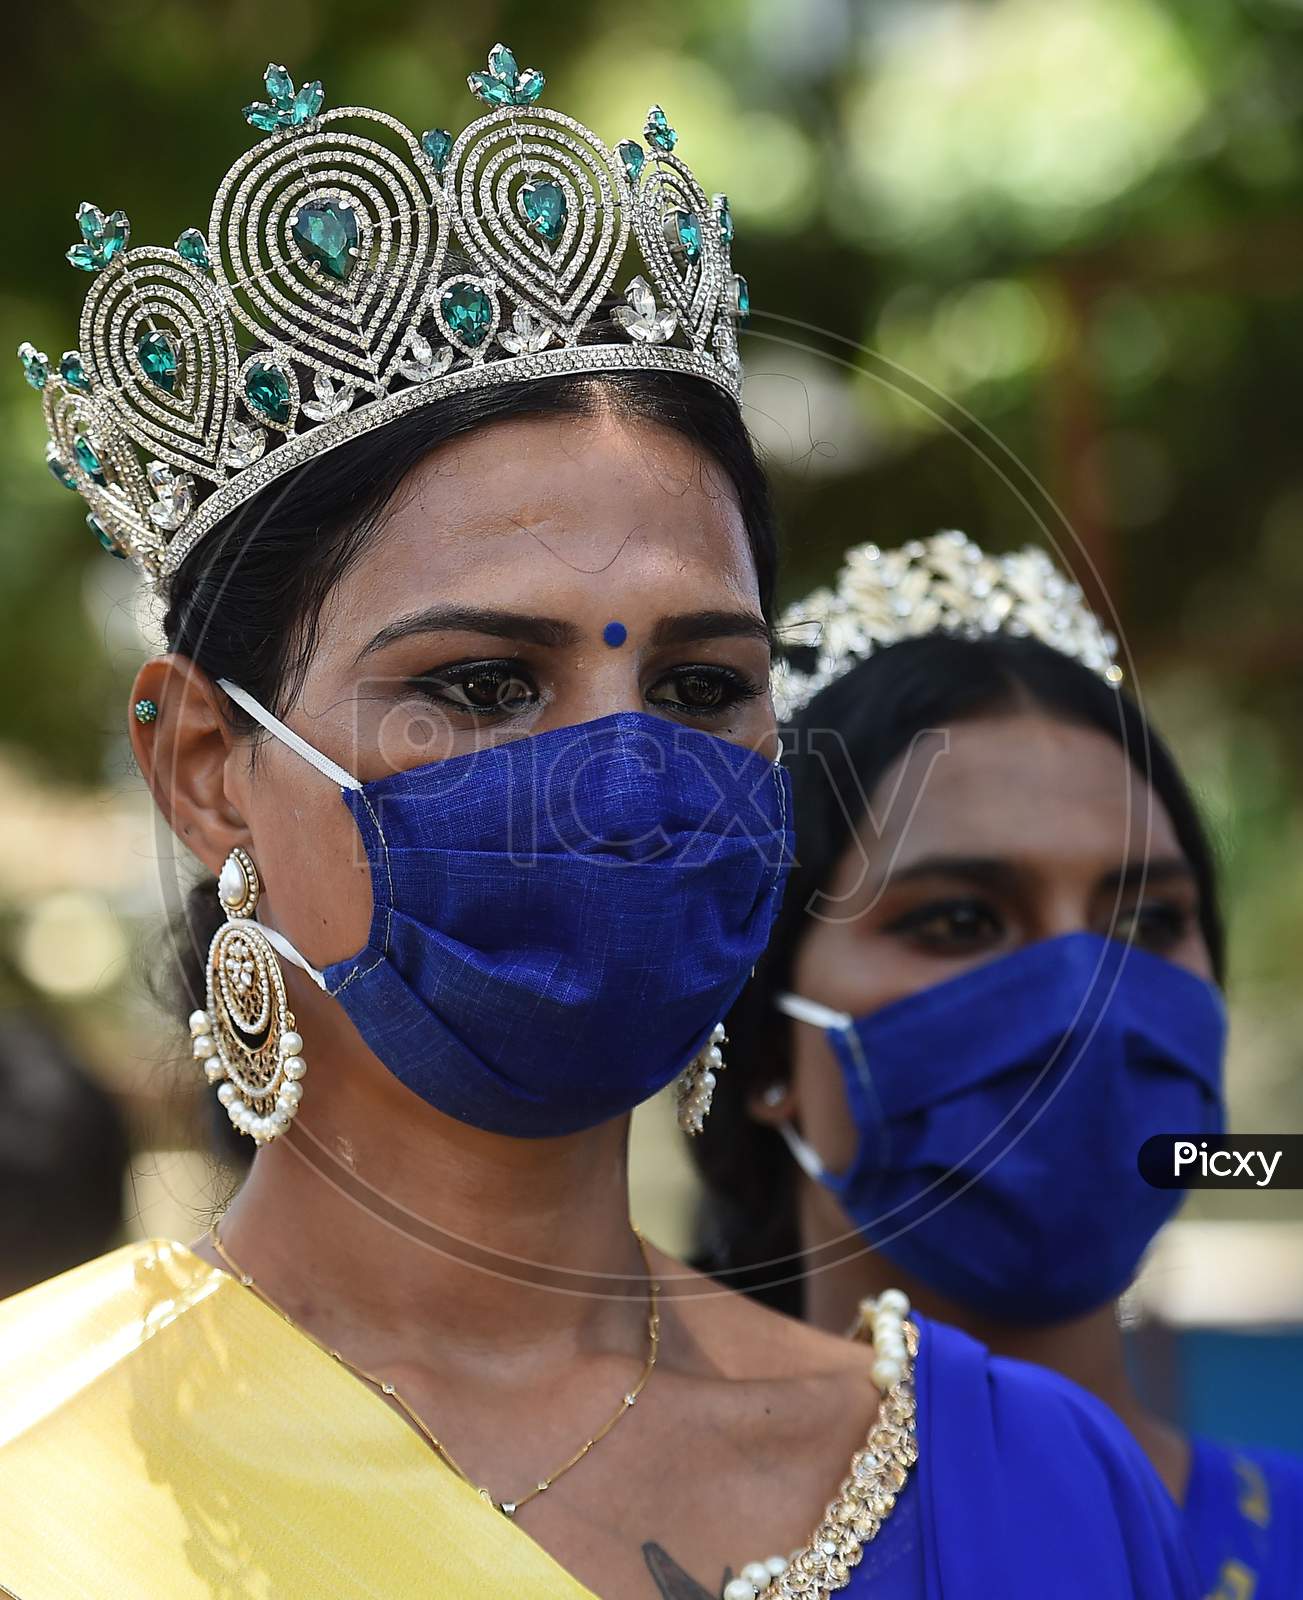 Members of the transgender community participate in a rally to spread awareness about Covid-19 after the authorities eased the restrictions in Chennai on July 8, 2020